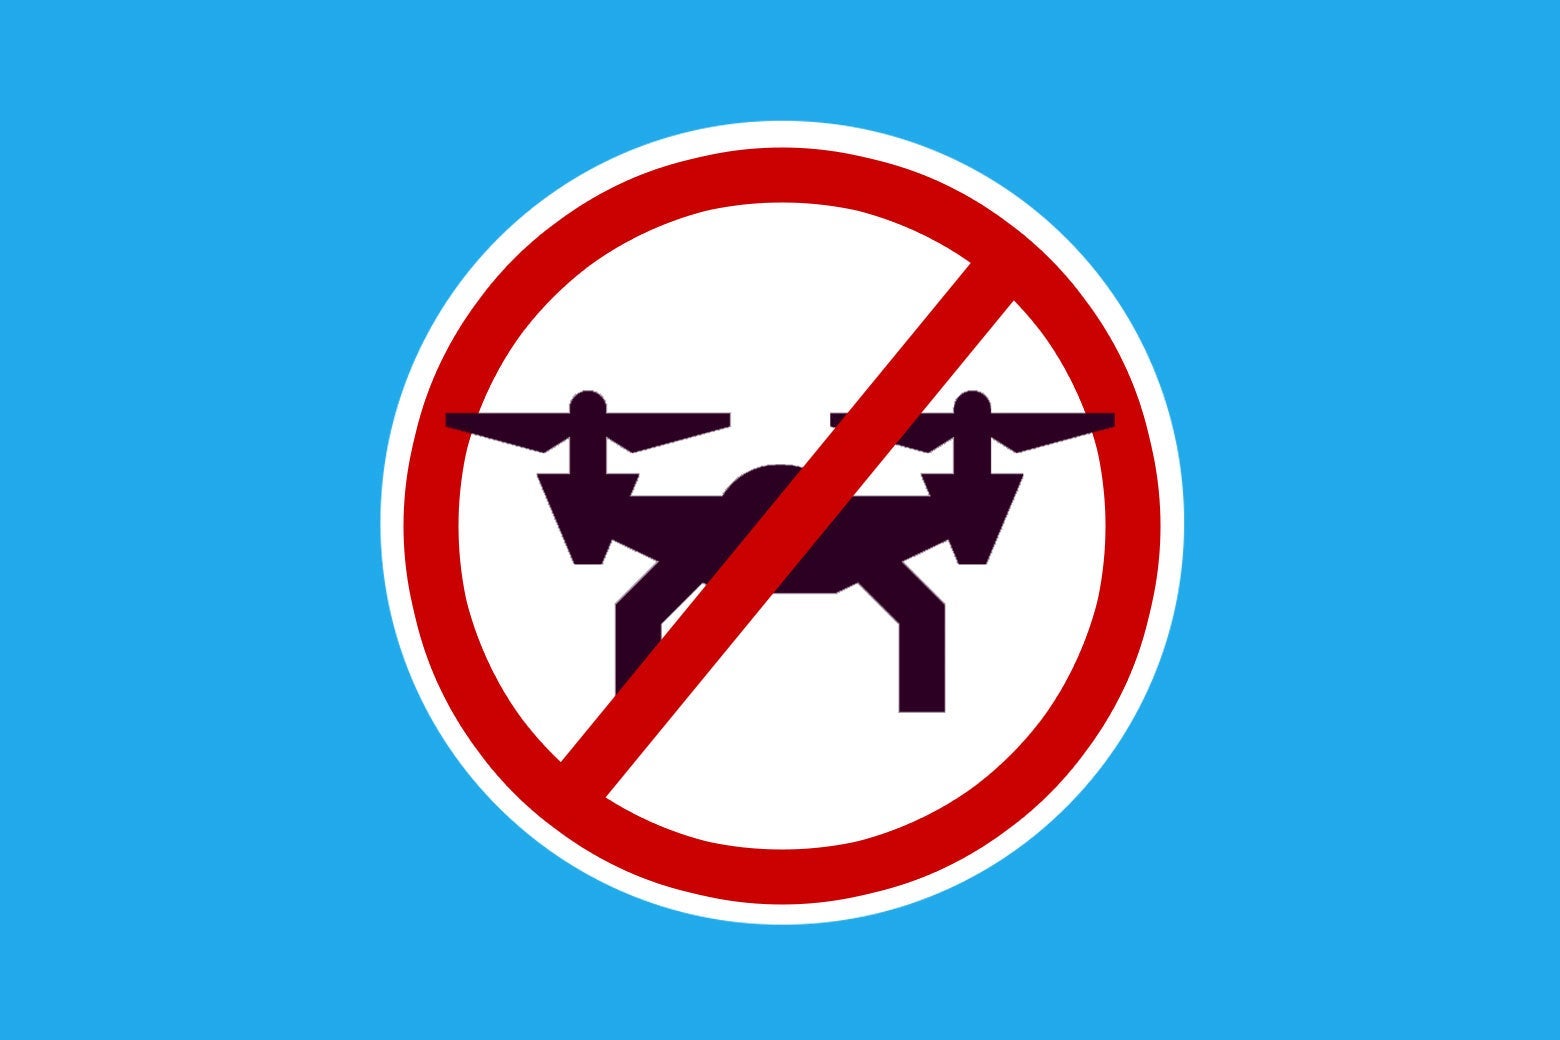 Photo illustration of a "No Drones" sign